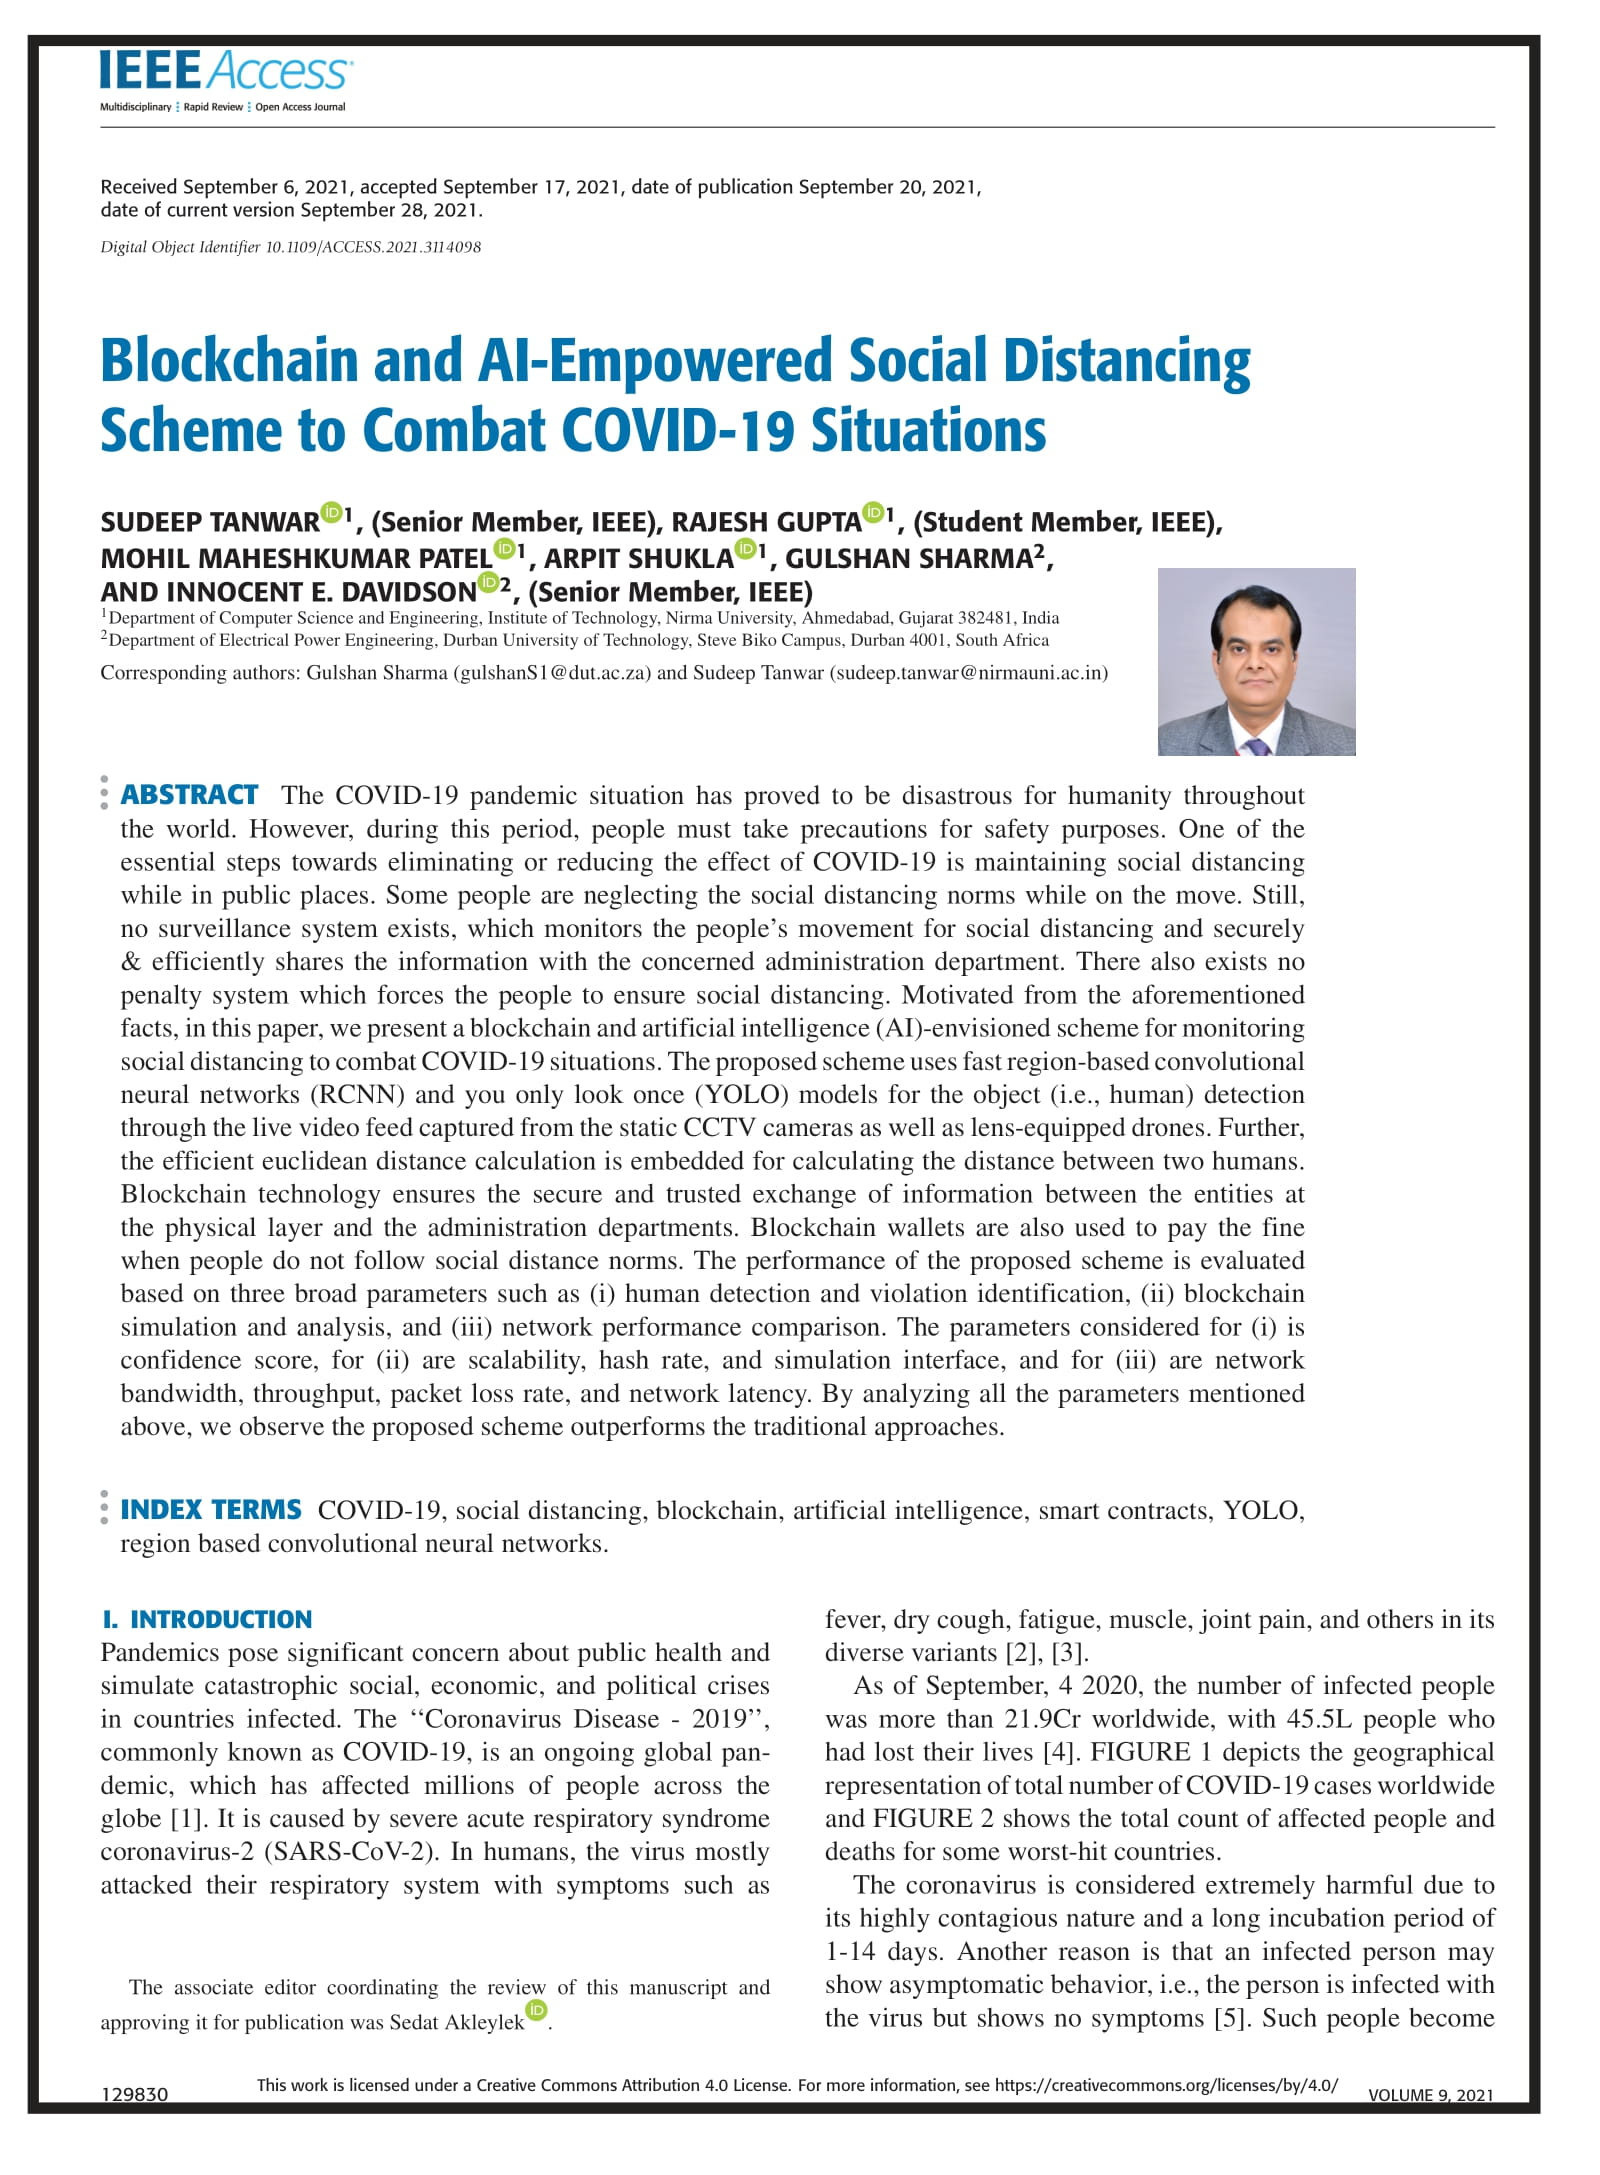 Blockchain and AI-empowered Social Distancing Scheme to Combat COVID-19 Situations